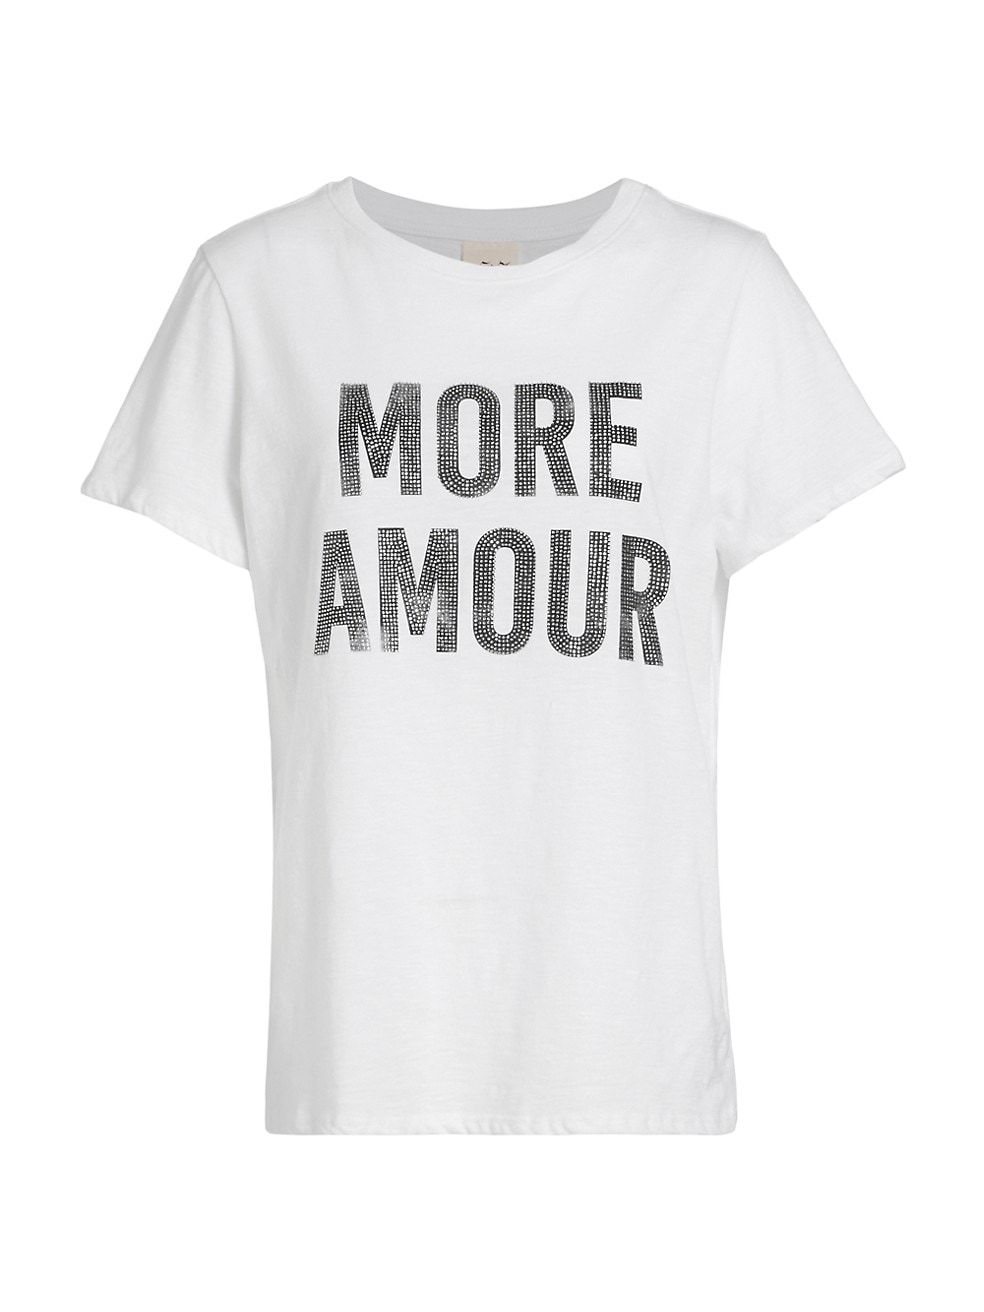 More Amour Rhinestone-Embellished CottonTee | Saks Fifth Avenue